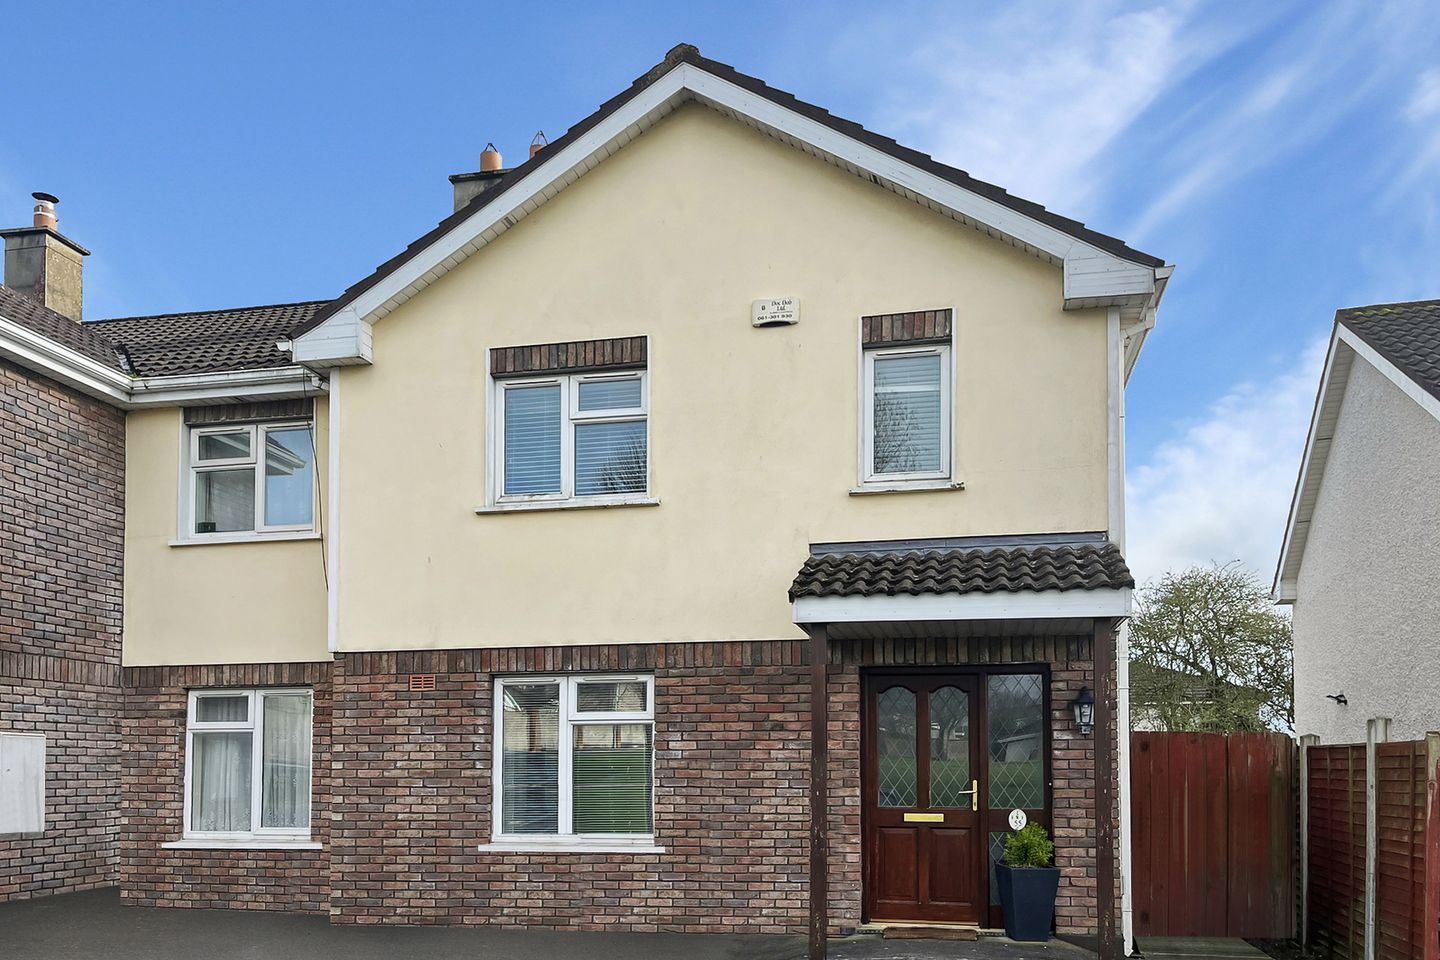 55 Cluain Dubh, Father Russell Road, Dooradoyle, Co. Limerick, V94YX3T